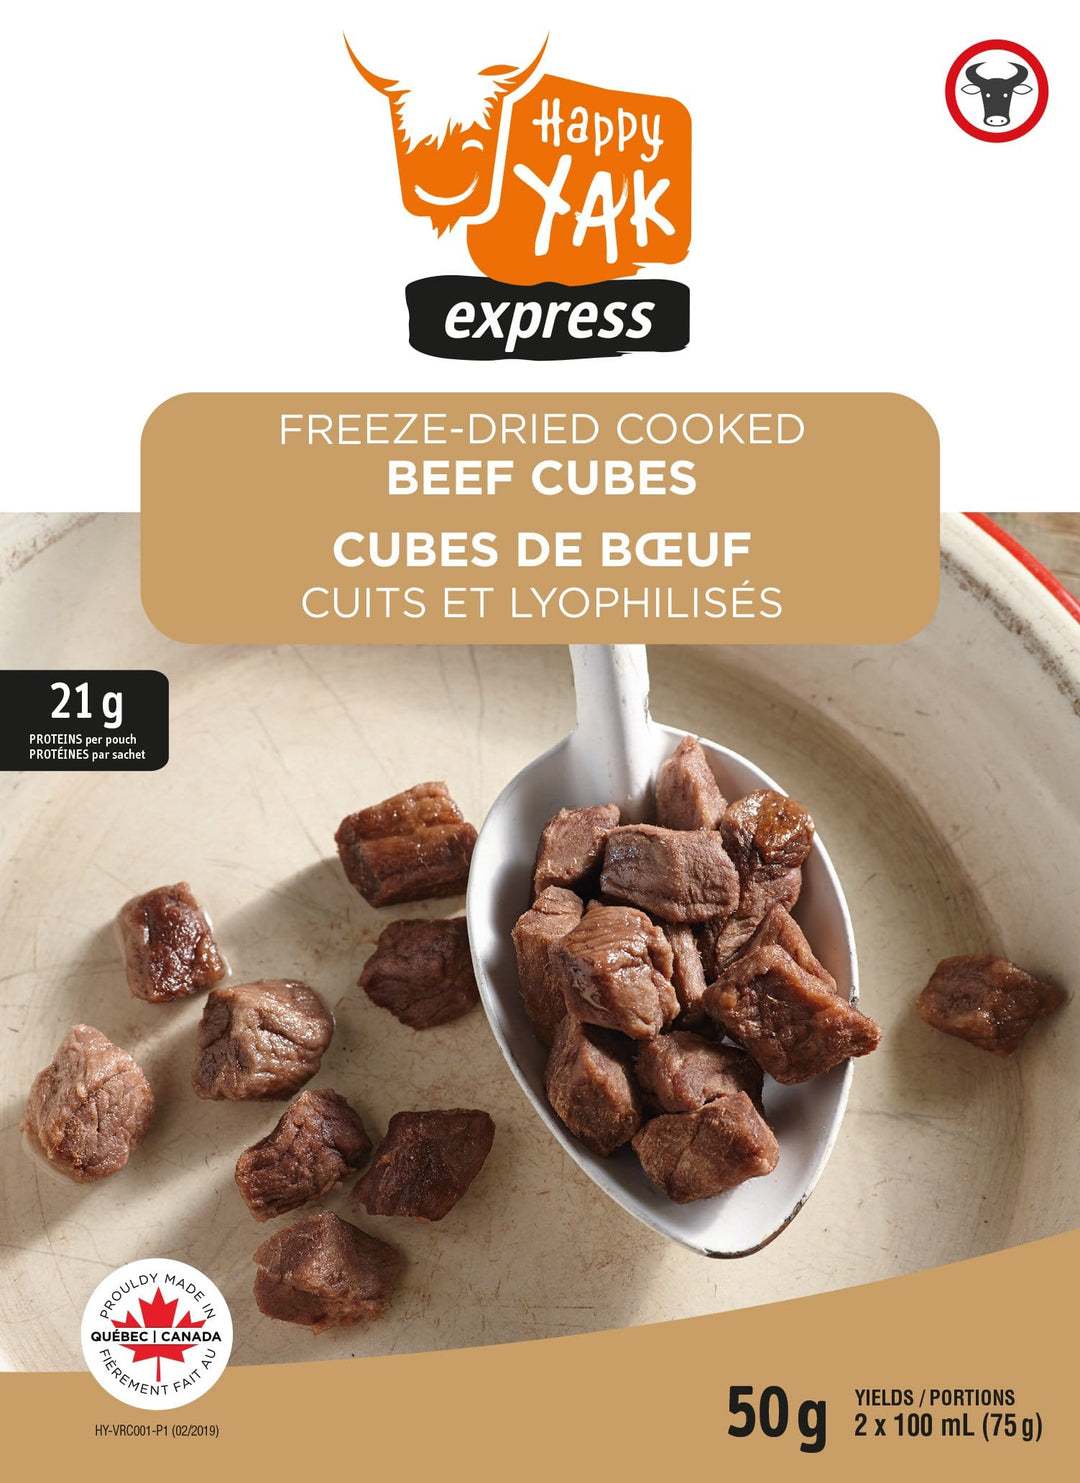 Happy Yak Freeze-Dried Cooked Beef Cubes (50g)